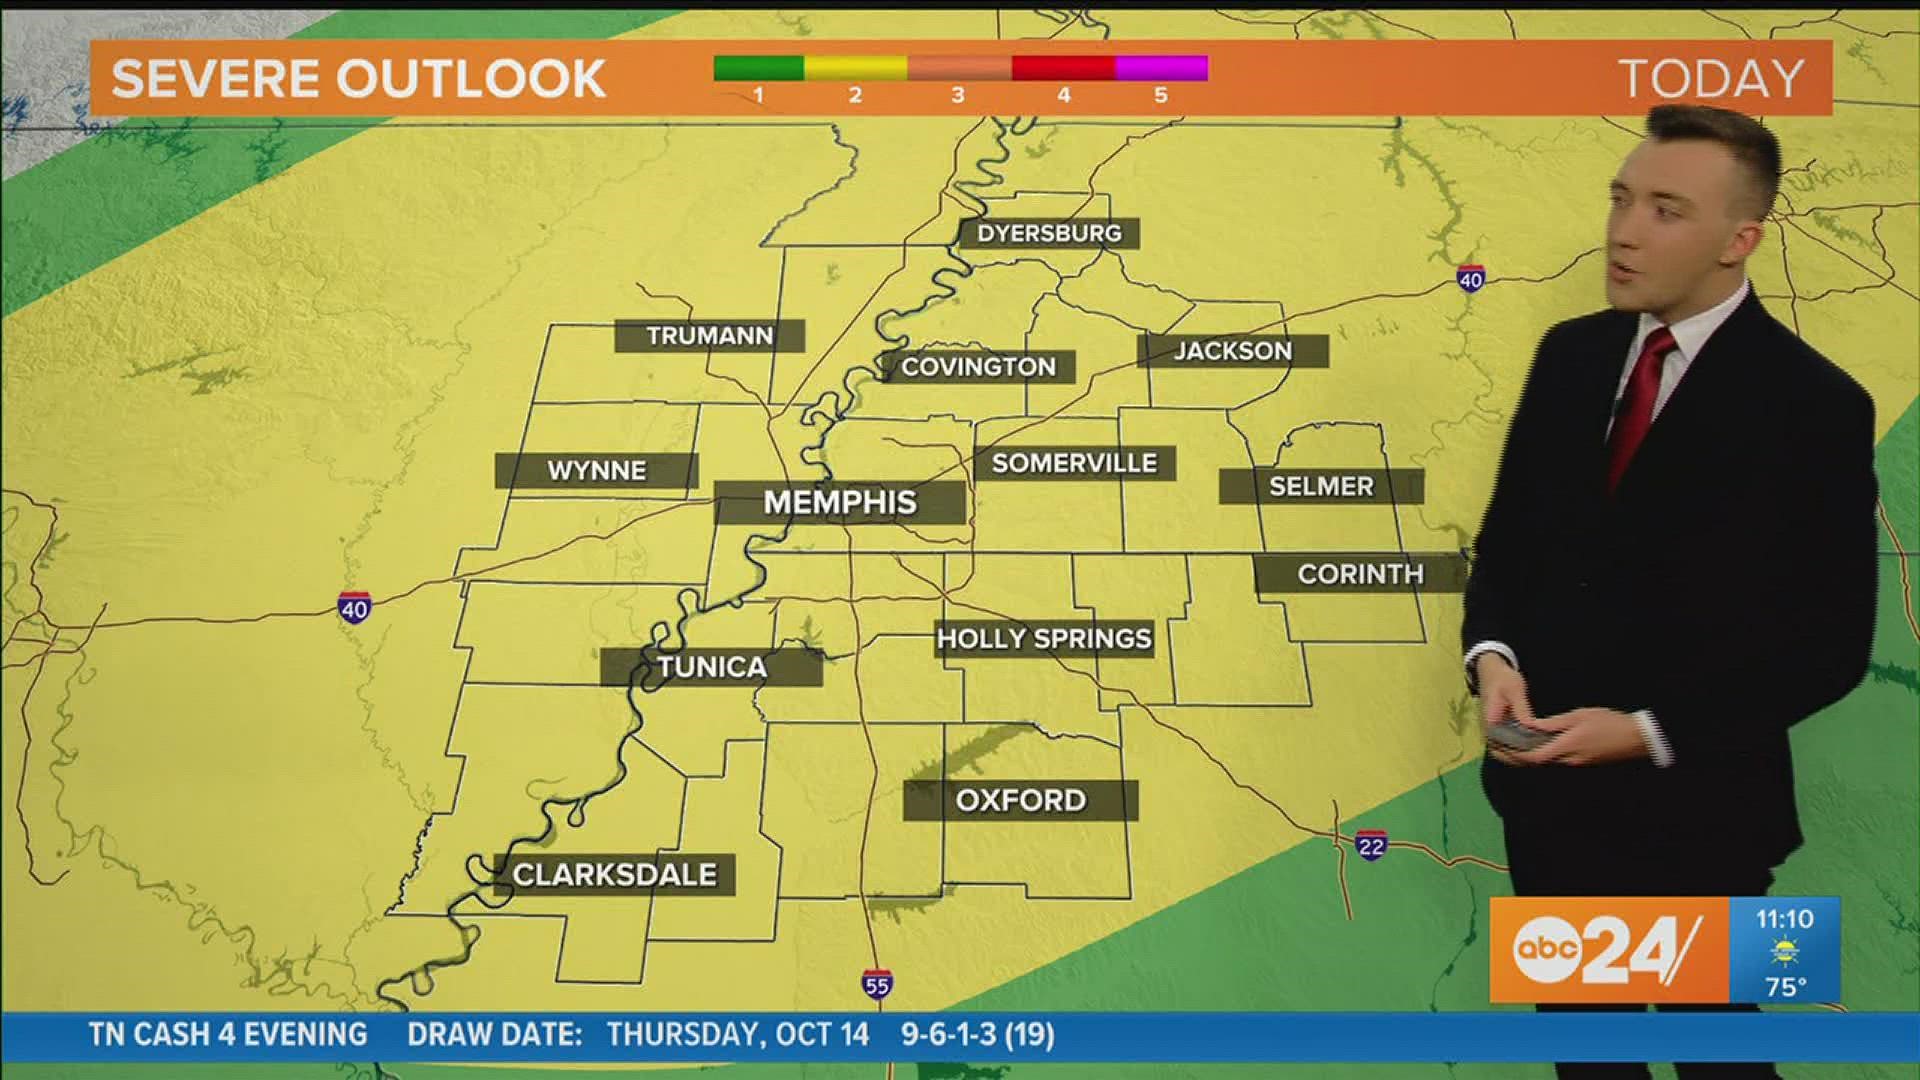 Meteorologist Trevor Birchett says severe weather is possible in the Mid-South this evening.